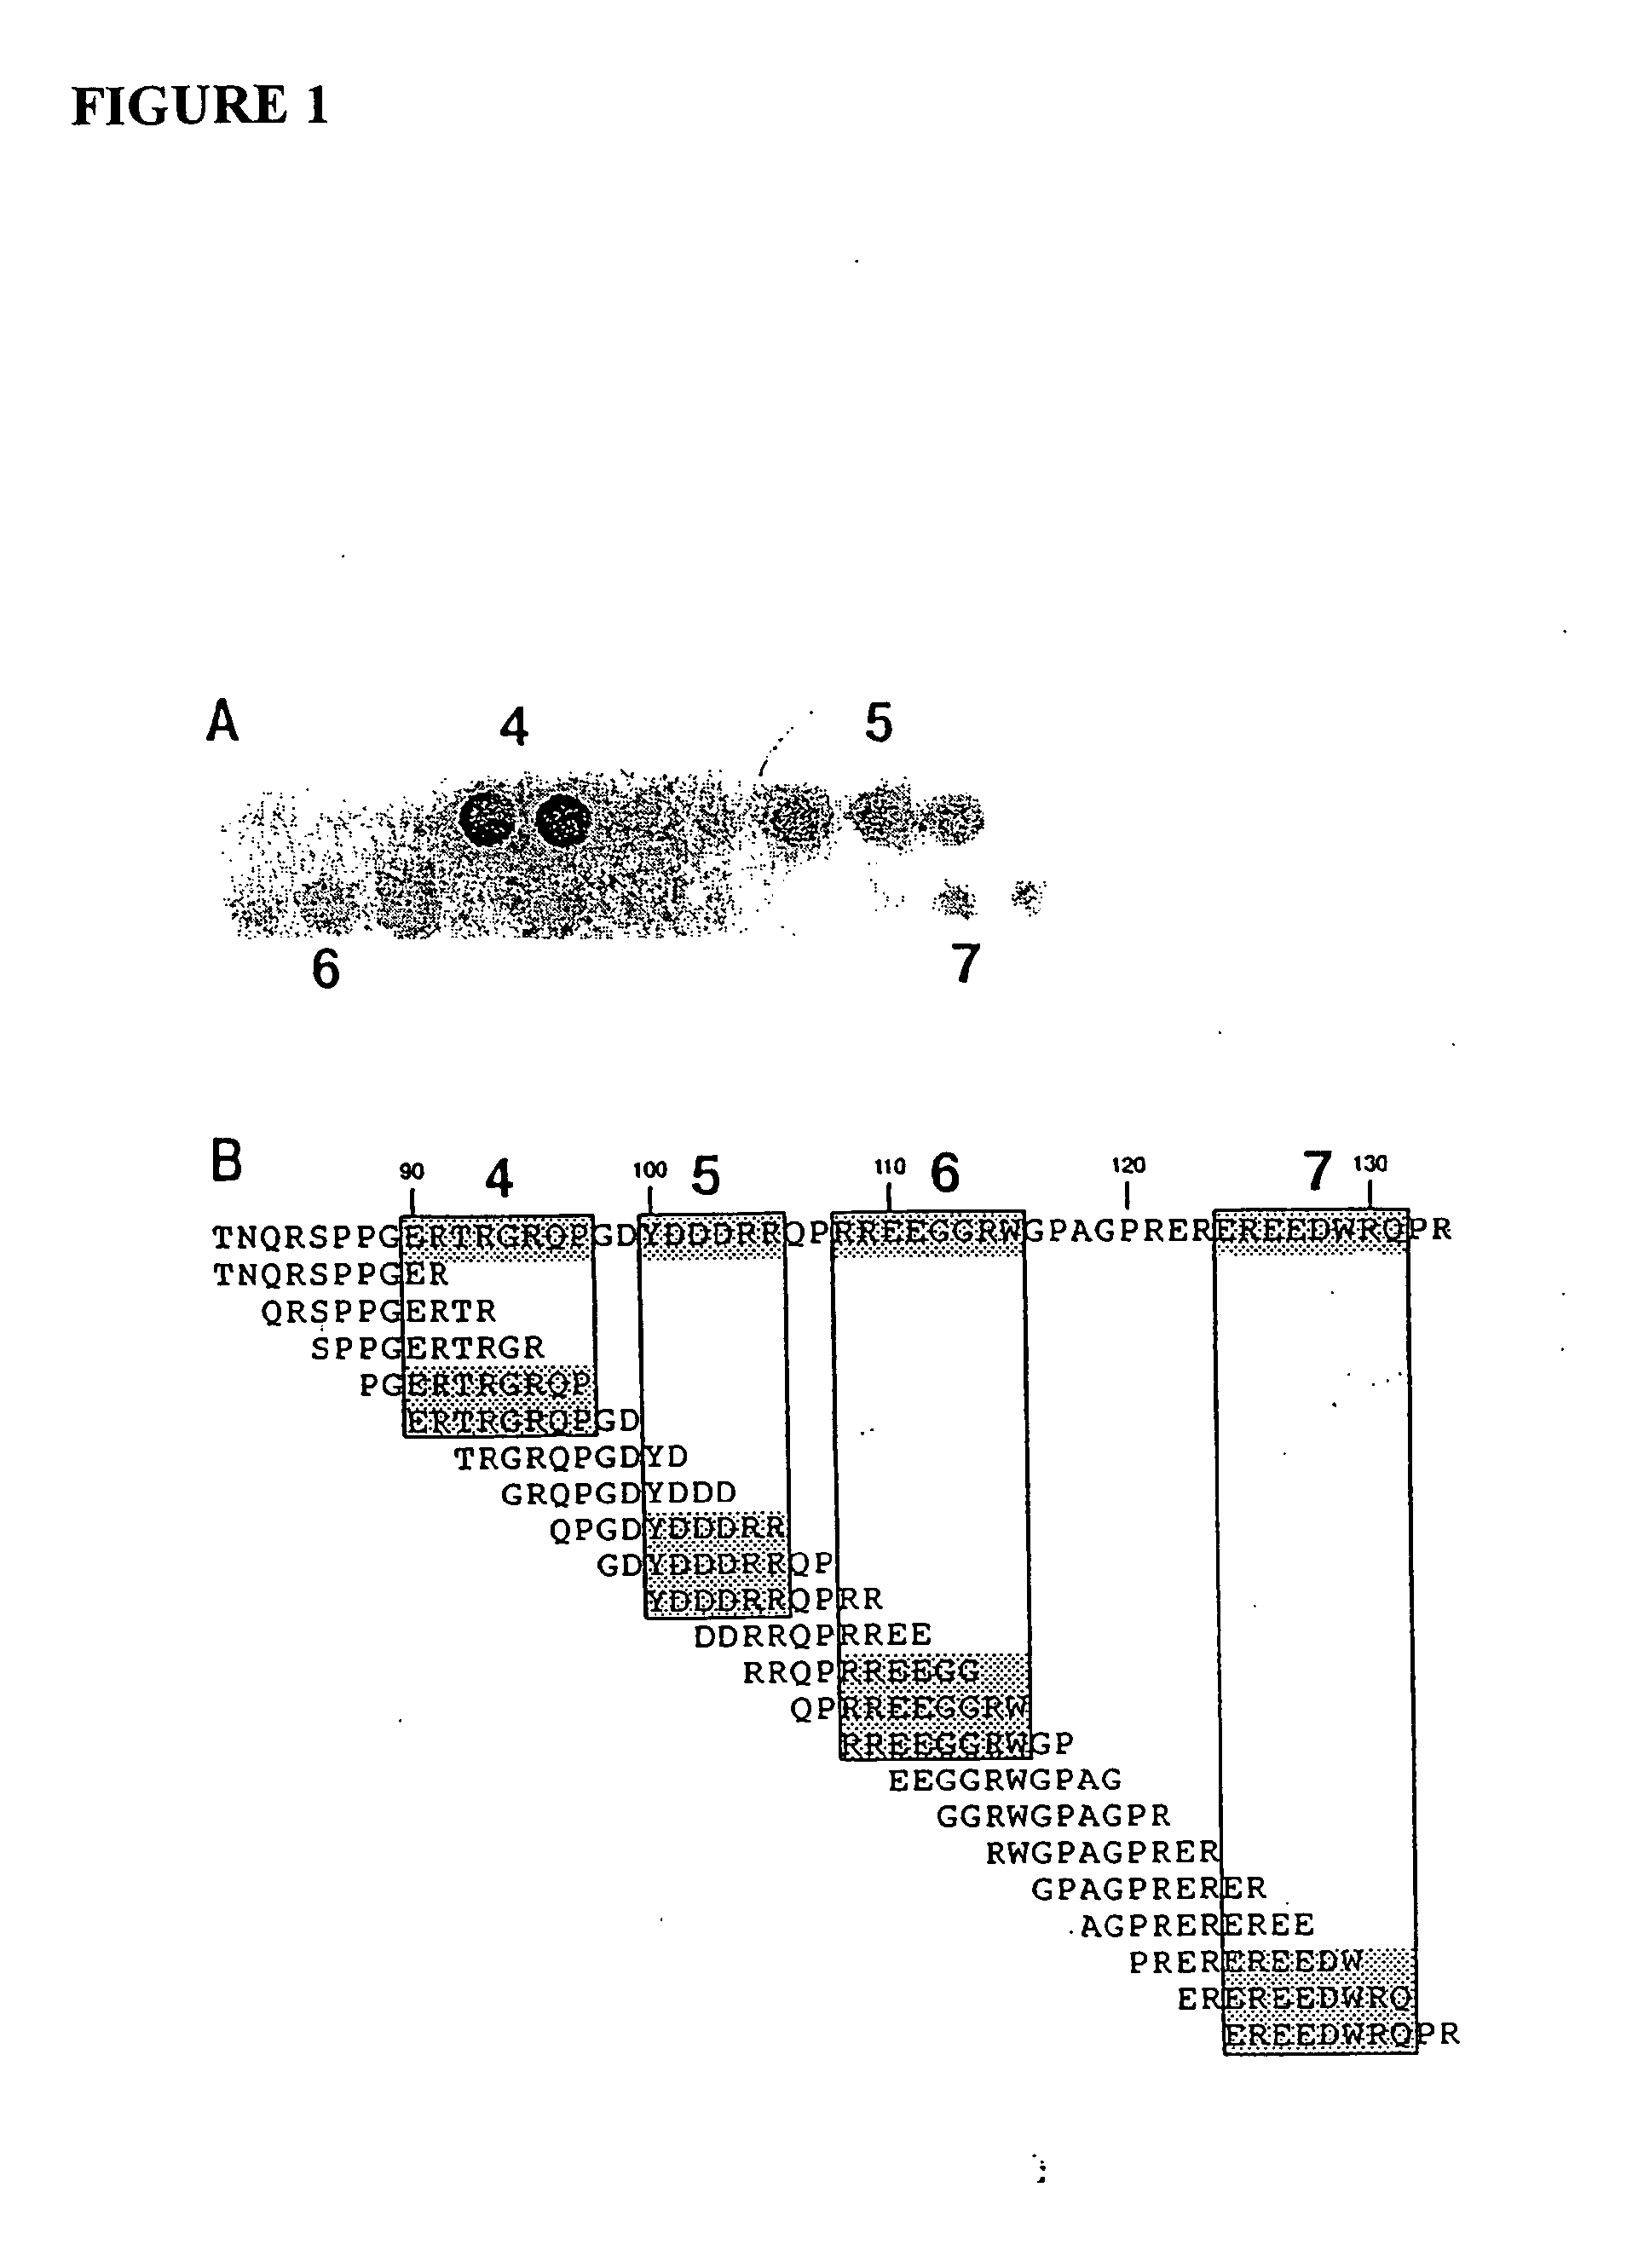 Methods and reagents for decreasing clinical reaction to allergy